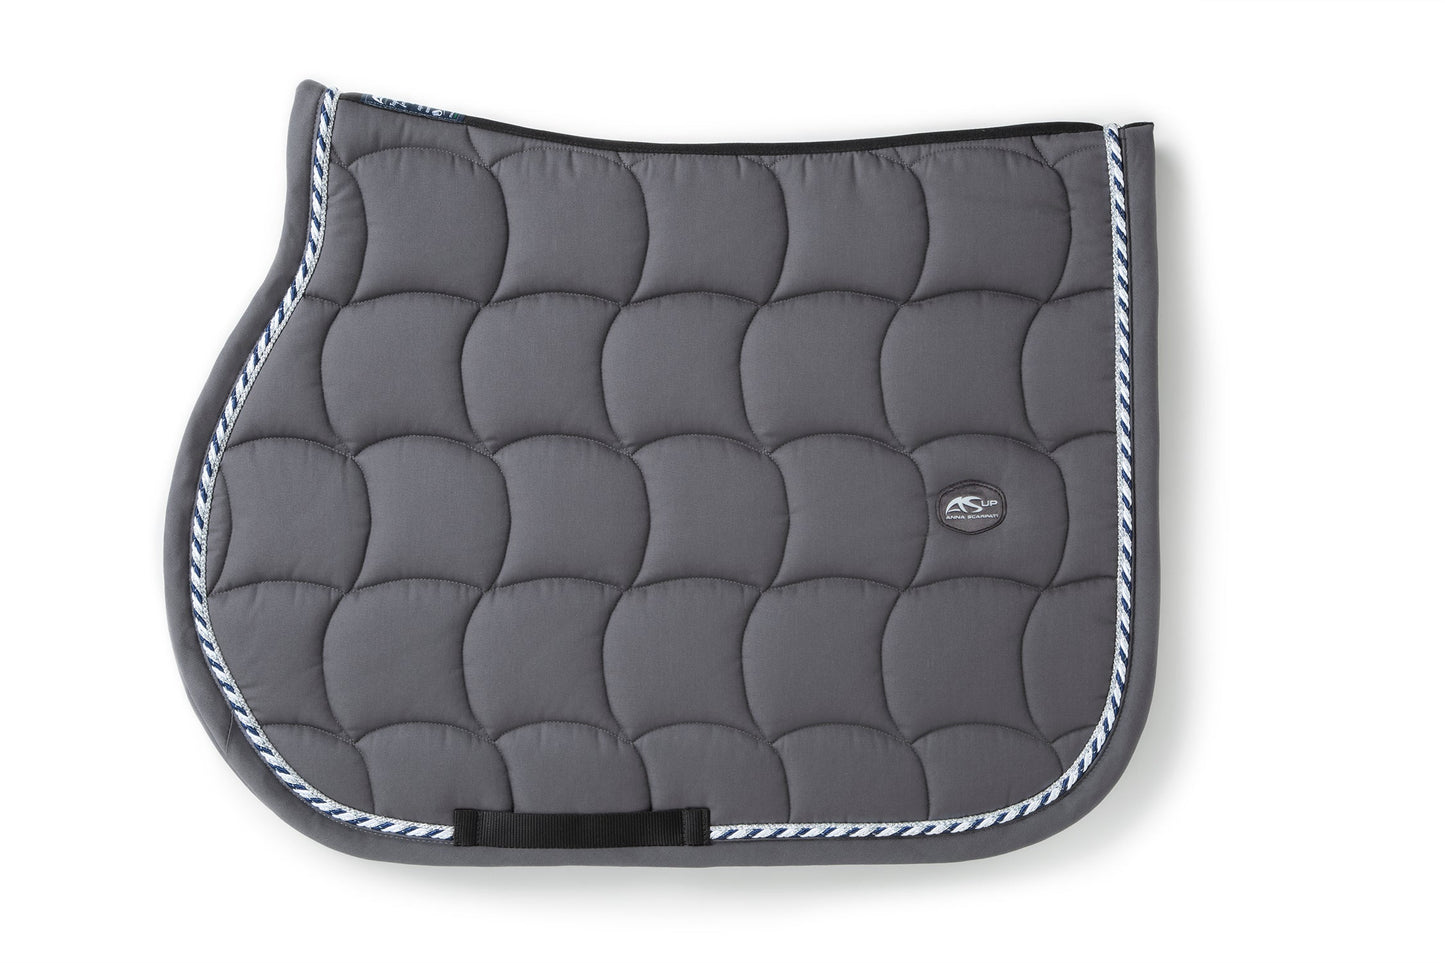 Anna Scarpati quilted horse saddle pad in gray with blue trim.